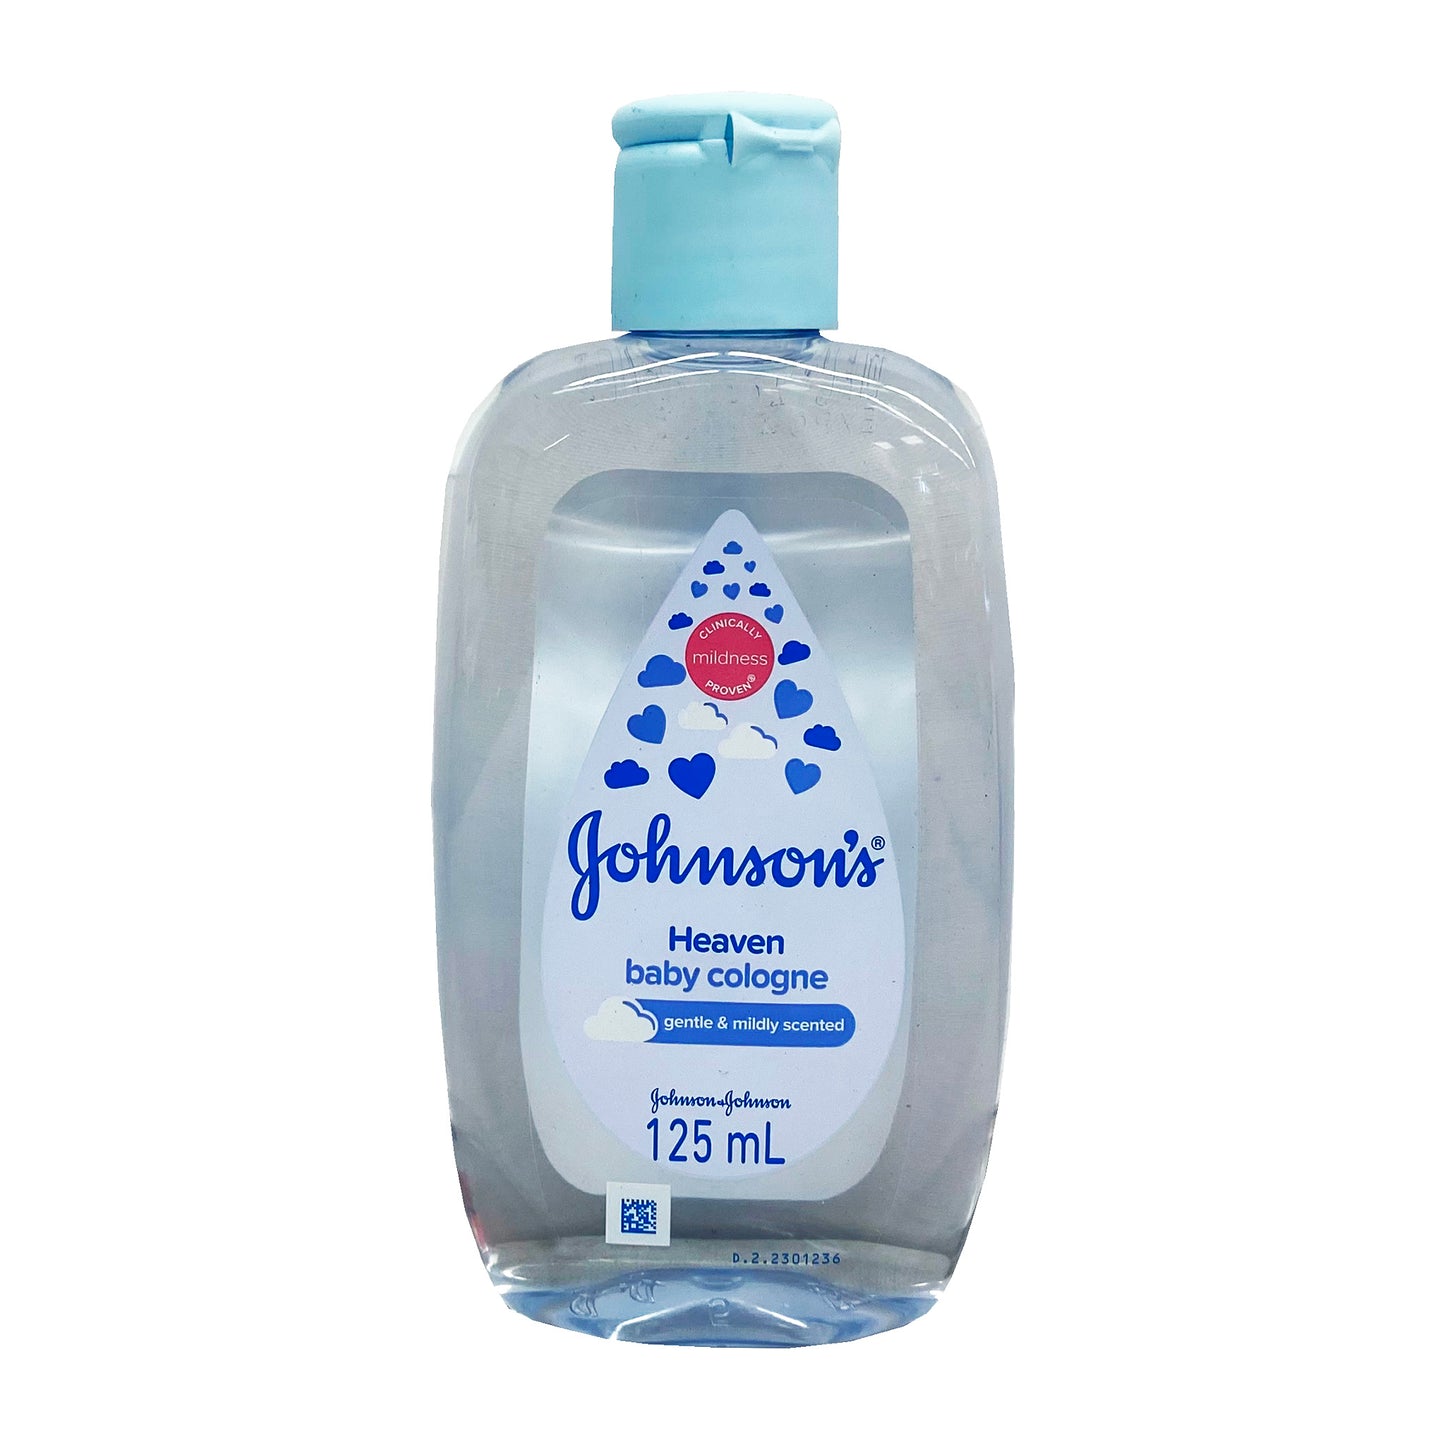 Front graphic view of Johnson's Baby Cologne - Heaven 4.22oz (125ml)